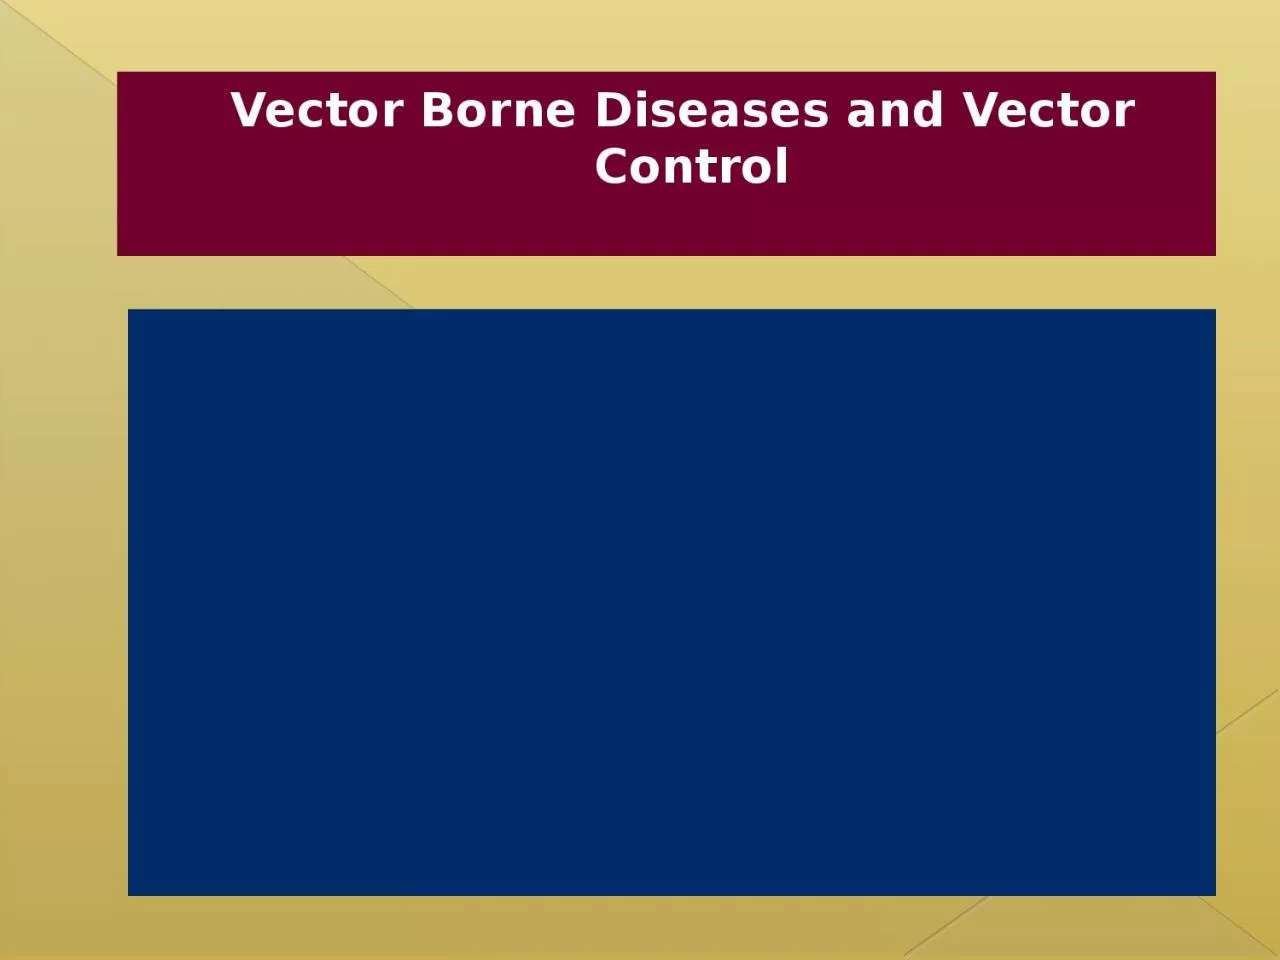 Vector Borne Diseases and Vector